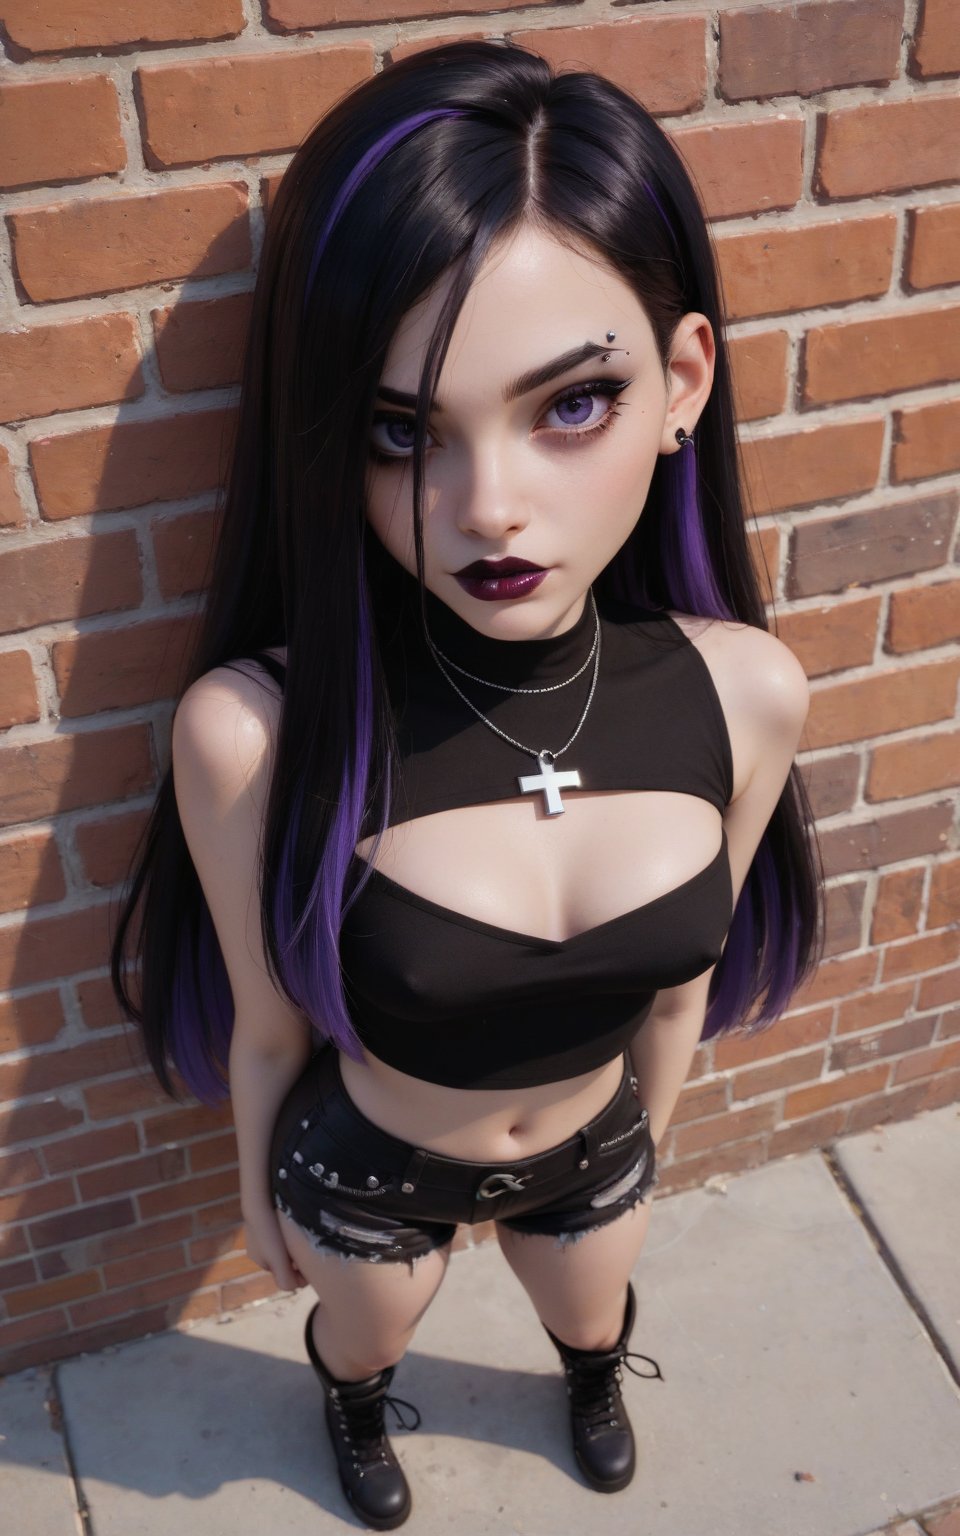 score_9, score_8_up, score_7_up, violetparr, Violet Parr,Goth girl, goth, 1girl, solo,looking at viewer,long hair hair, black hair,red IncursioDipDyedHair, asymmetrical hairstyle, bare shoulders,hair covering one eye,from above, sleeveless lace crop top,leather shorts, purple eyes,necklace,eyebrow piercing,two-tone hair,lips,makeup,lipstick,spot color , full body, cleavage, SkinHairDetail,  hands behind back, erected nipples, black combat boots,brick wall, SCORE_9,g4n1m3,ExpressiveH